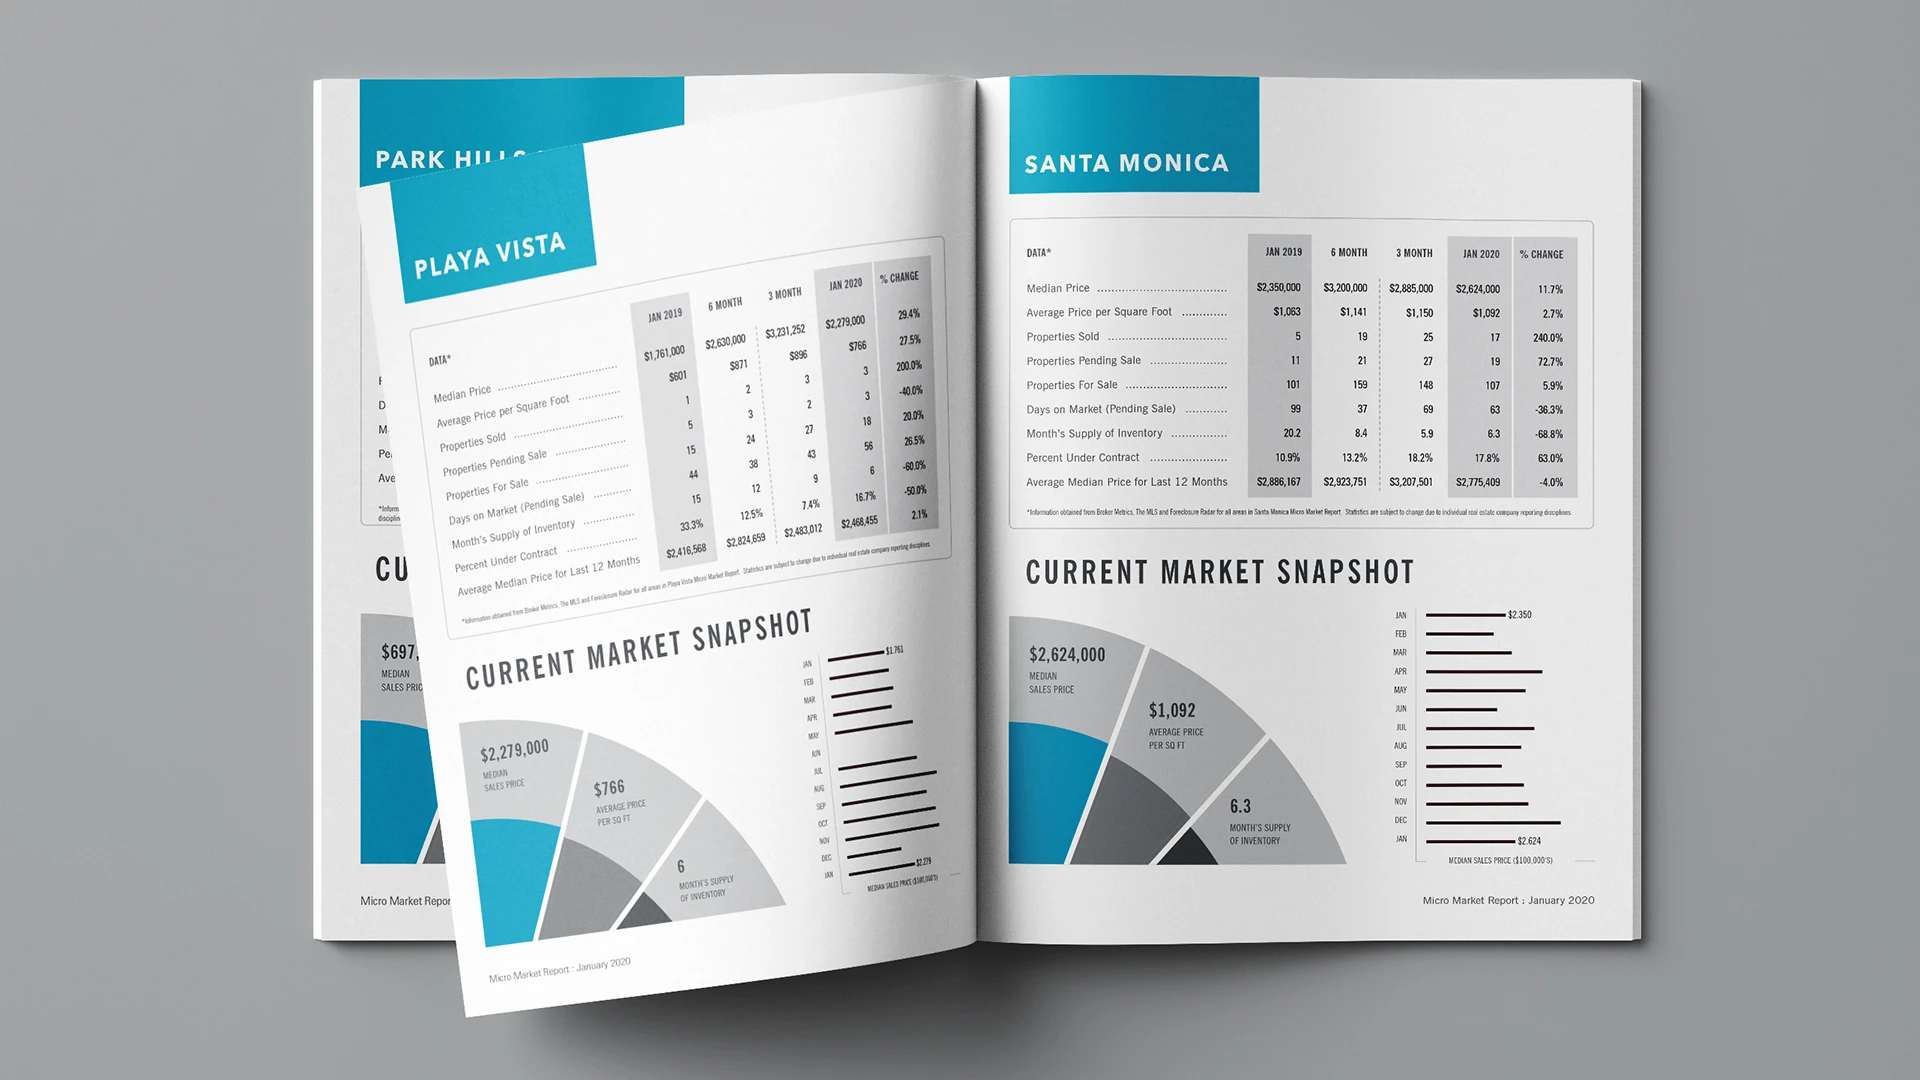 A mockup demonstrating example spreads from the Micro Market Report in its design form from 2019 through early 2020.